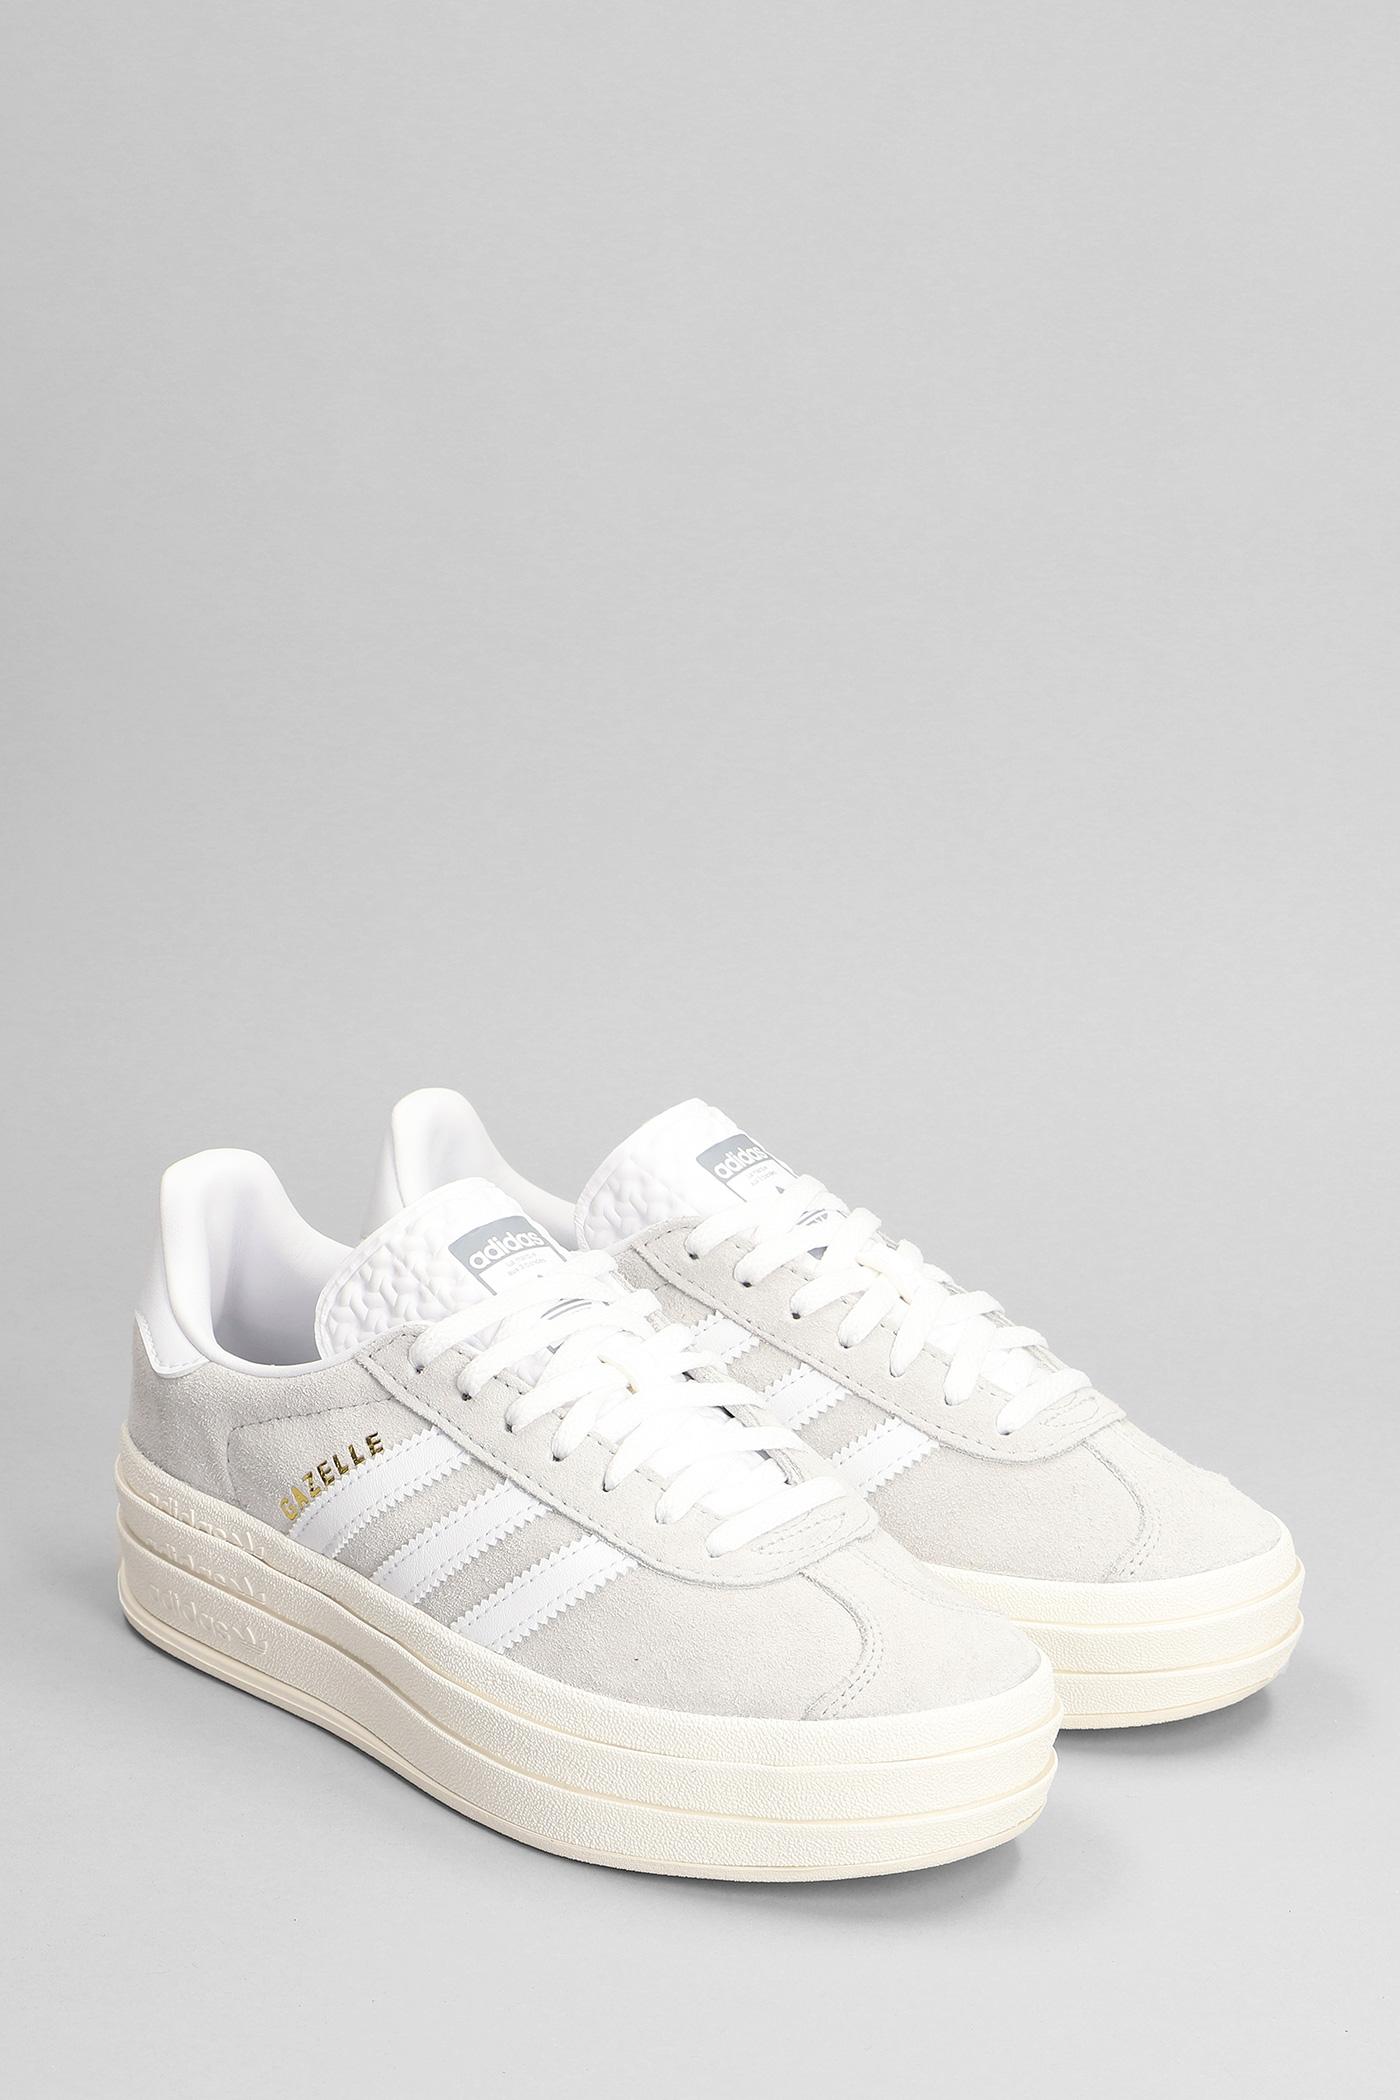 adidas Bold Sneakers In Suede White |